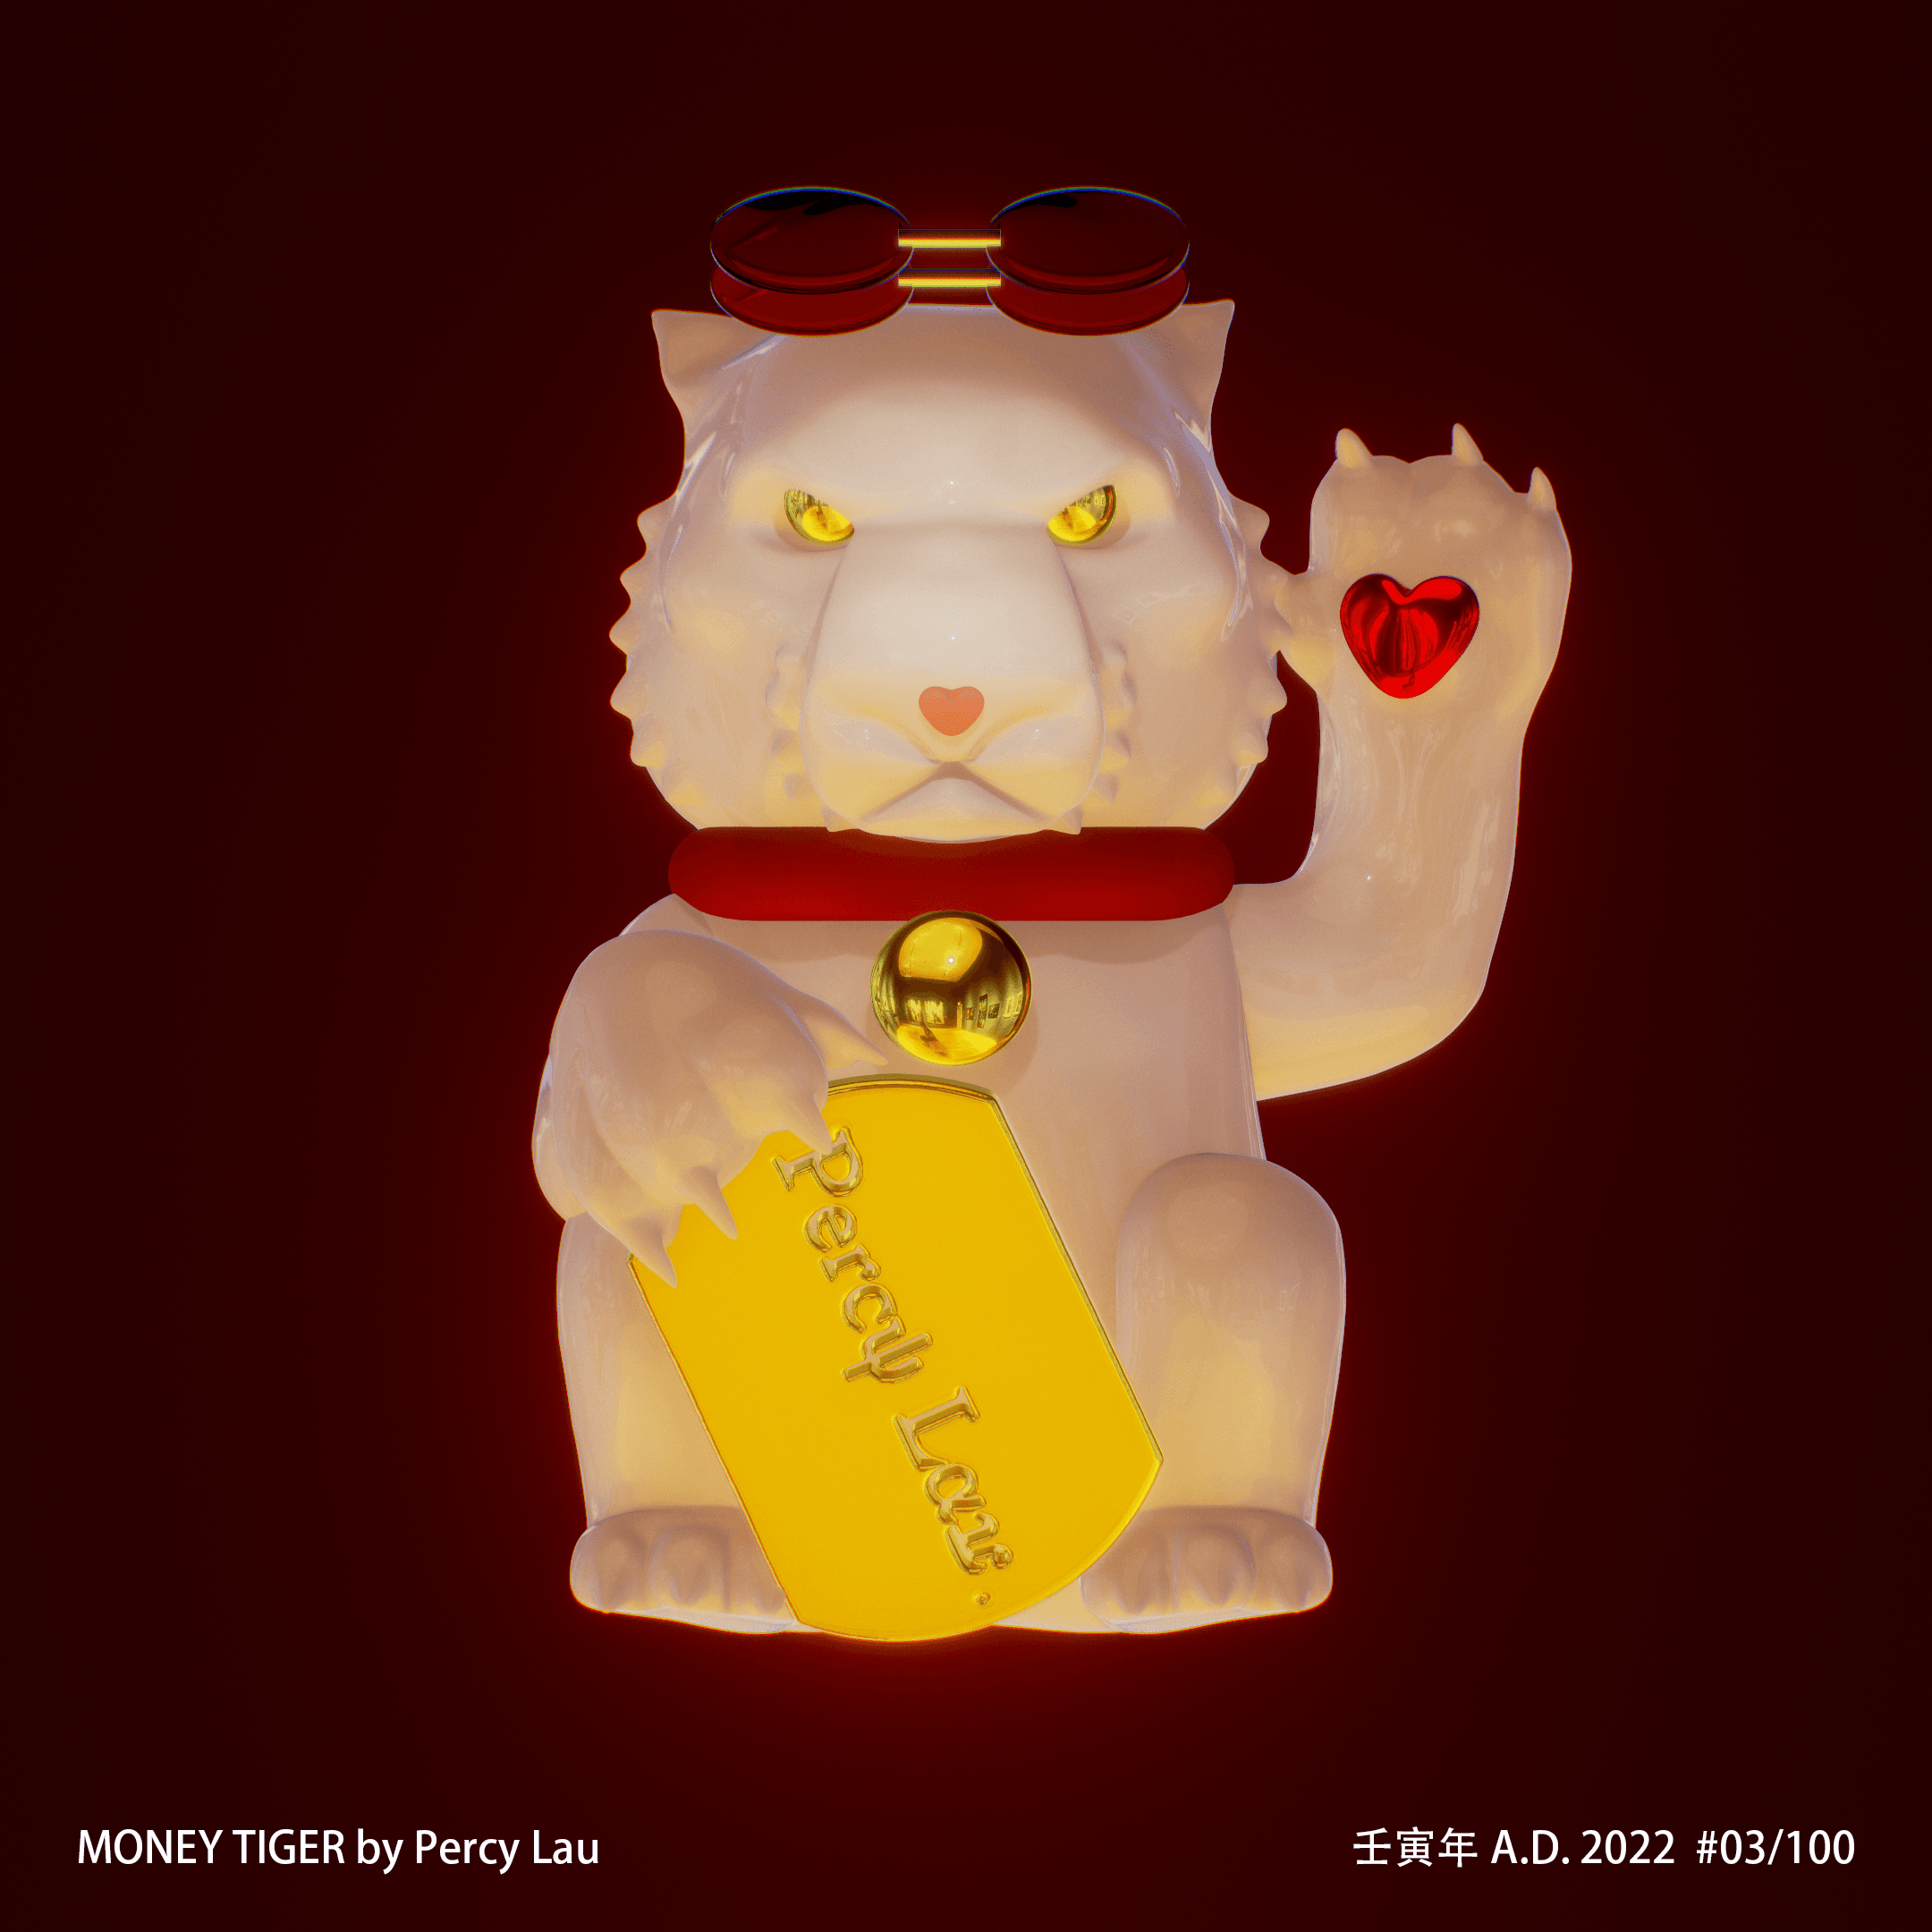 MONEY TIGER-Happy CHINESE NEW YEAR #03/100